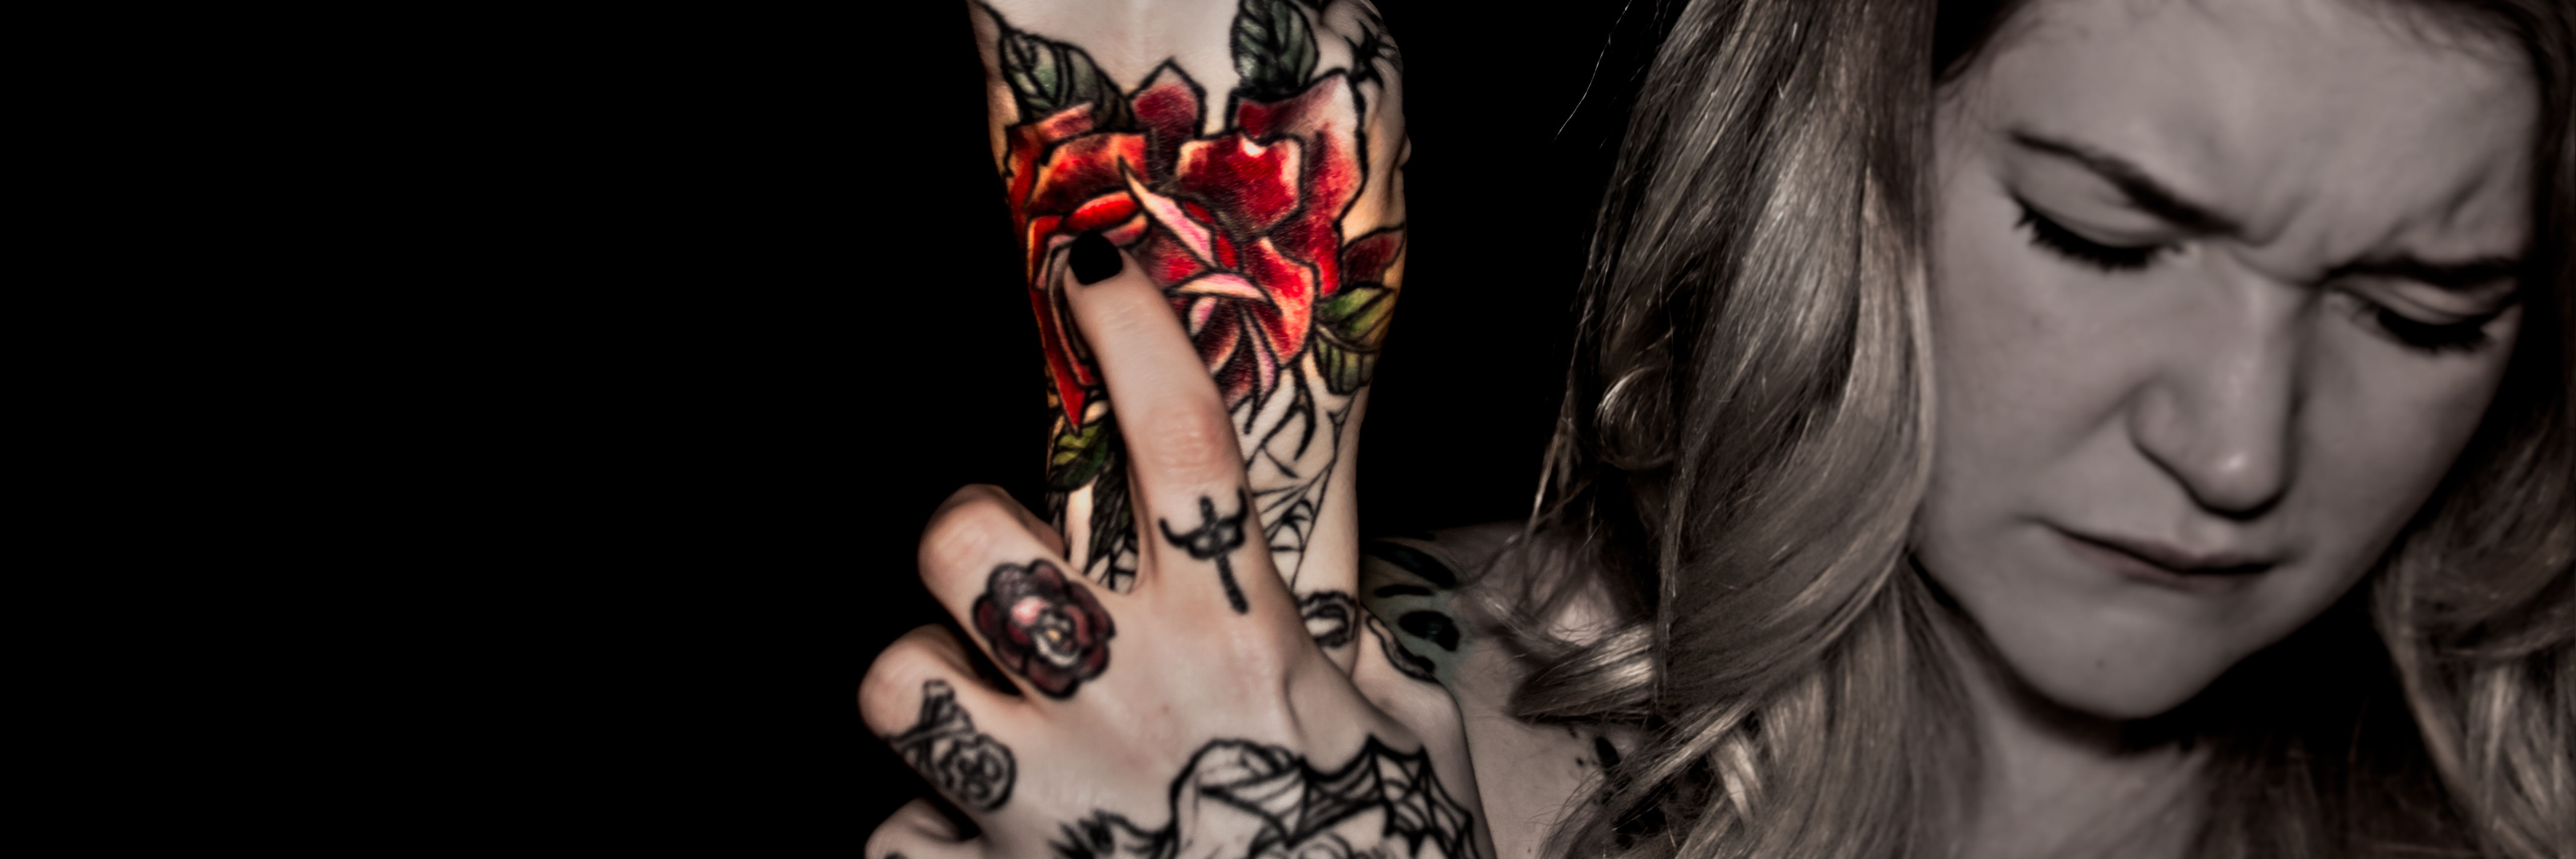 photo of woman with tattooes holding her wrist in pain